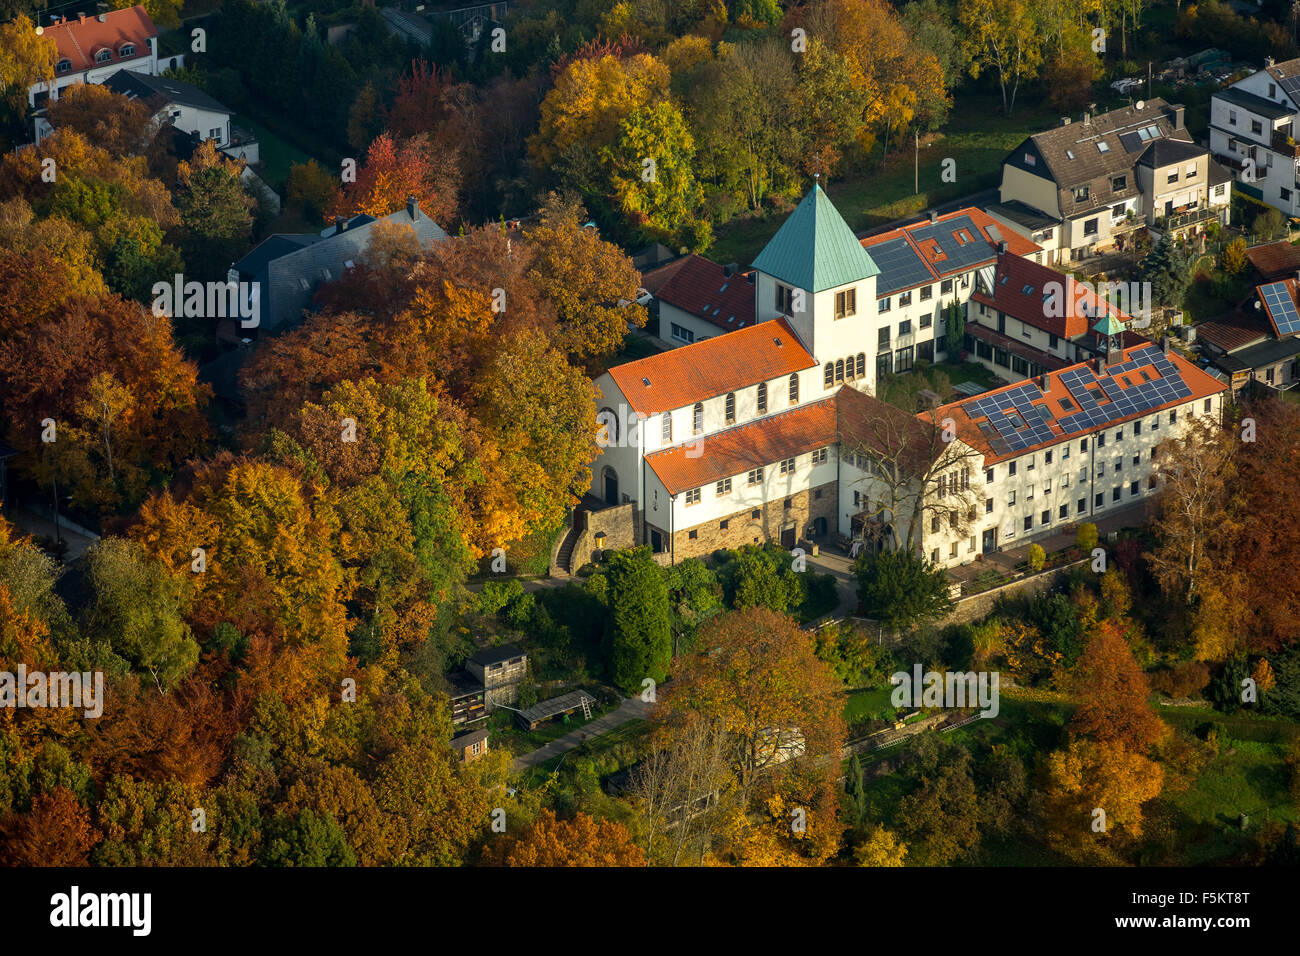 Convent of the Carmelites on the cliff, Witten with a garden in autumn Stock Photo